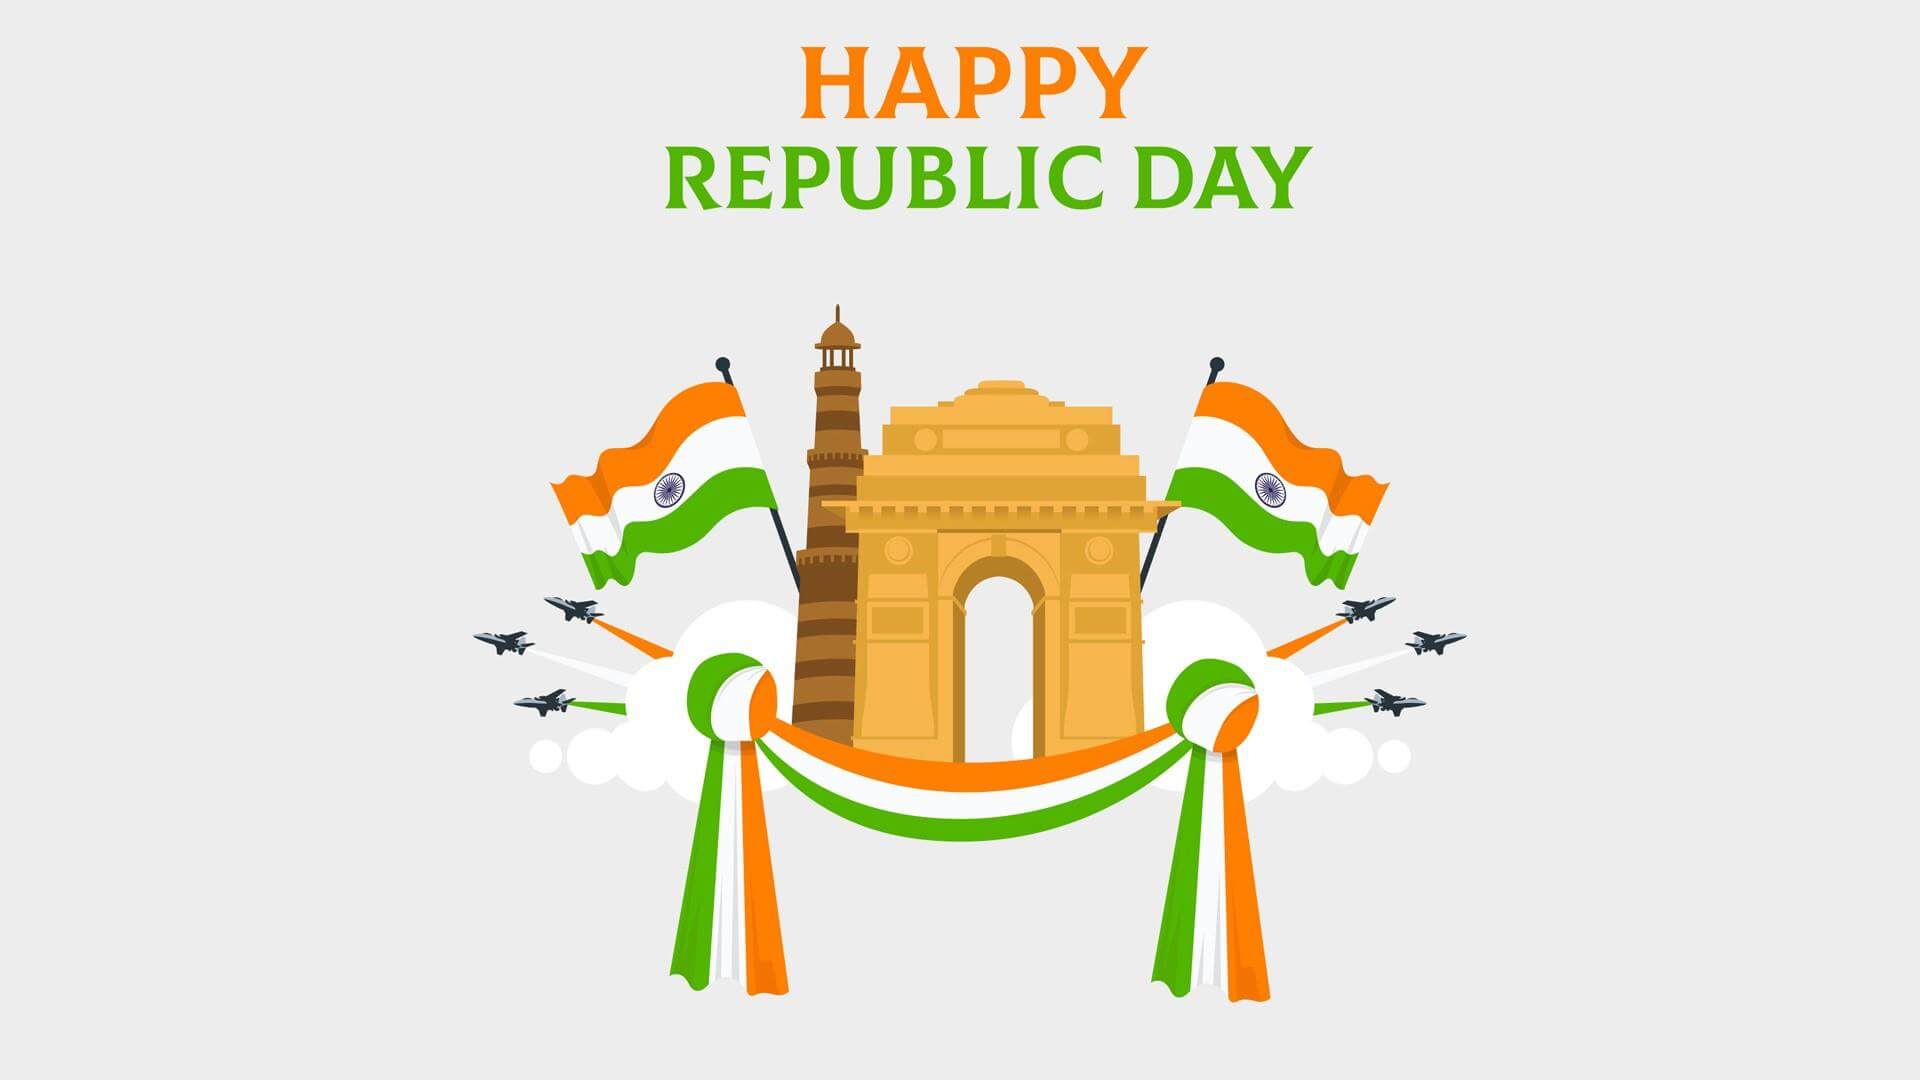 Featured image of post Republic Day 2021 Hd Background Images / 26 january republic day gantantra diwas hd images wallpapers background photo 2020 download republic day wall paper happy republic day flag wallpaper 2021 facebook whatsapp dp image jpg and gif and 26 january name wallpaper and 26 january hd.